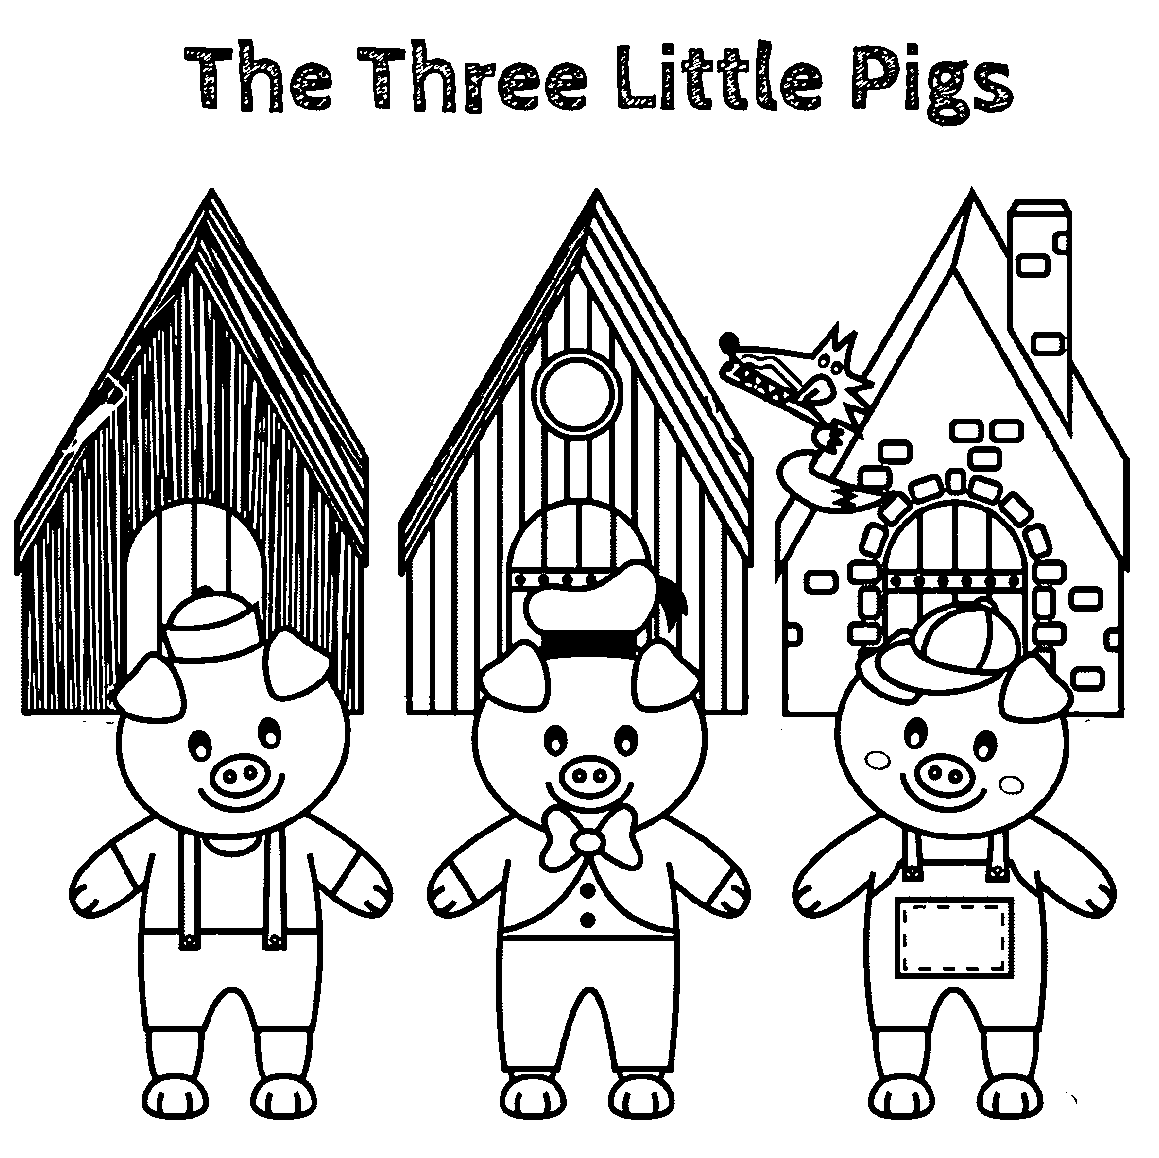 Three Little Pigs Story Printable With Pictures One Platform For